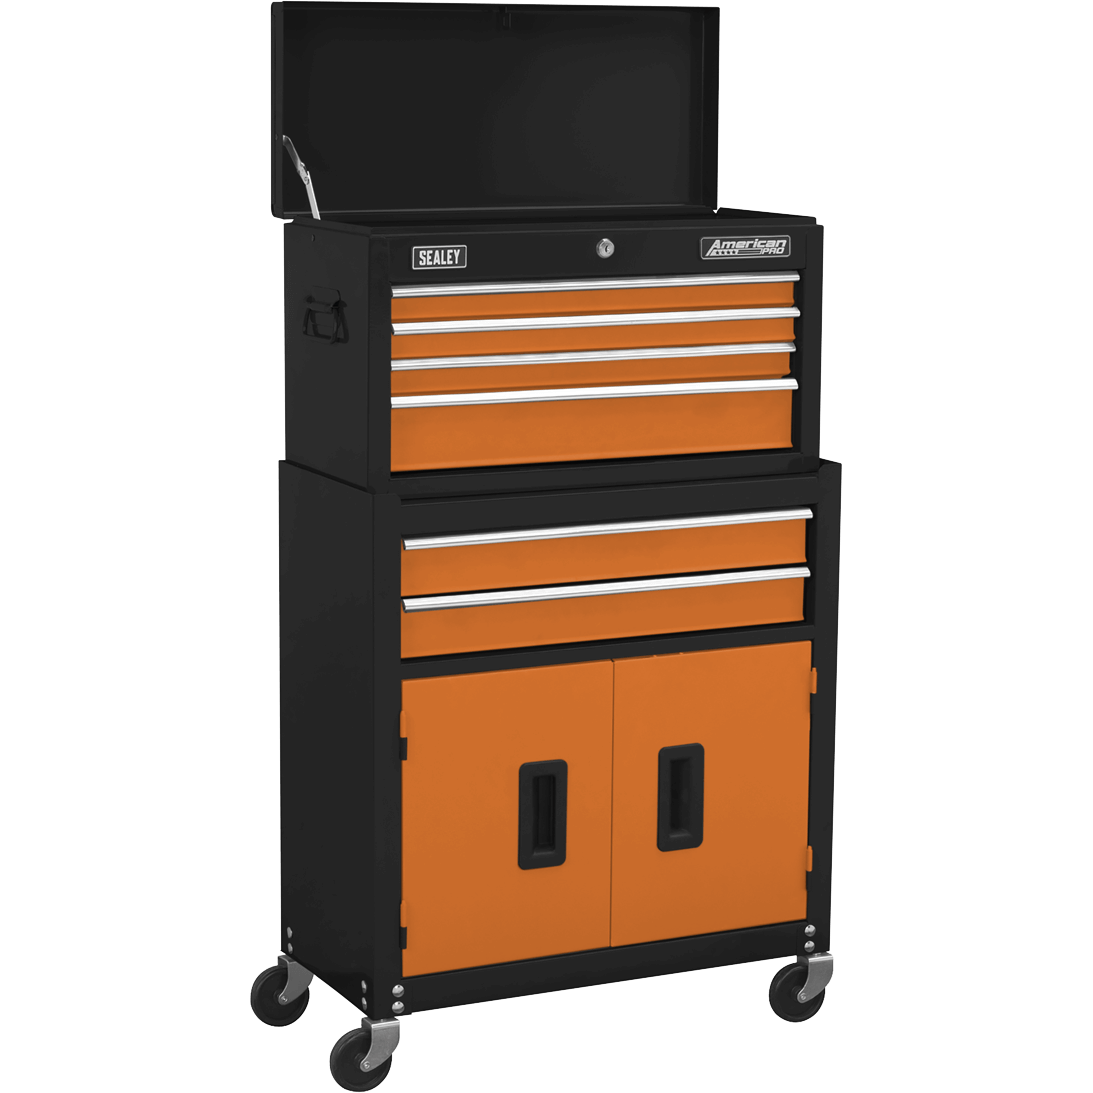 Sealey 6 Drawer Top Chest and Tool Roller Cabinet Combination Black / Orange